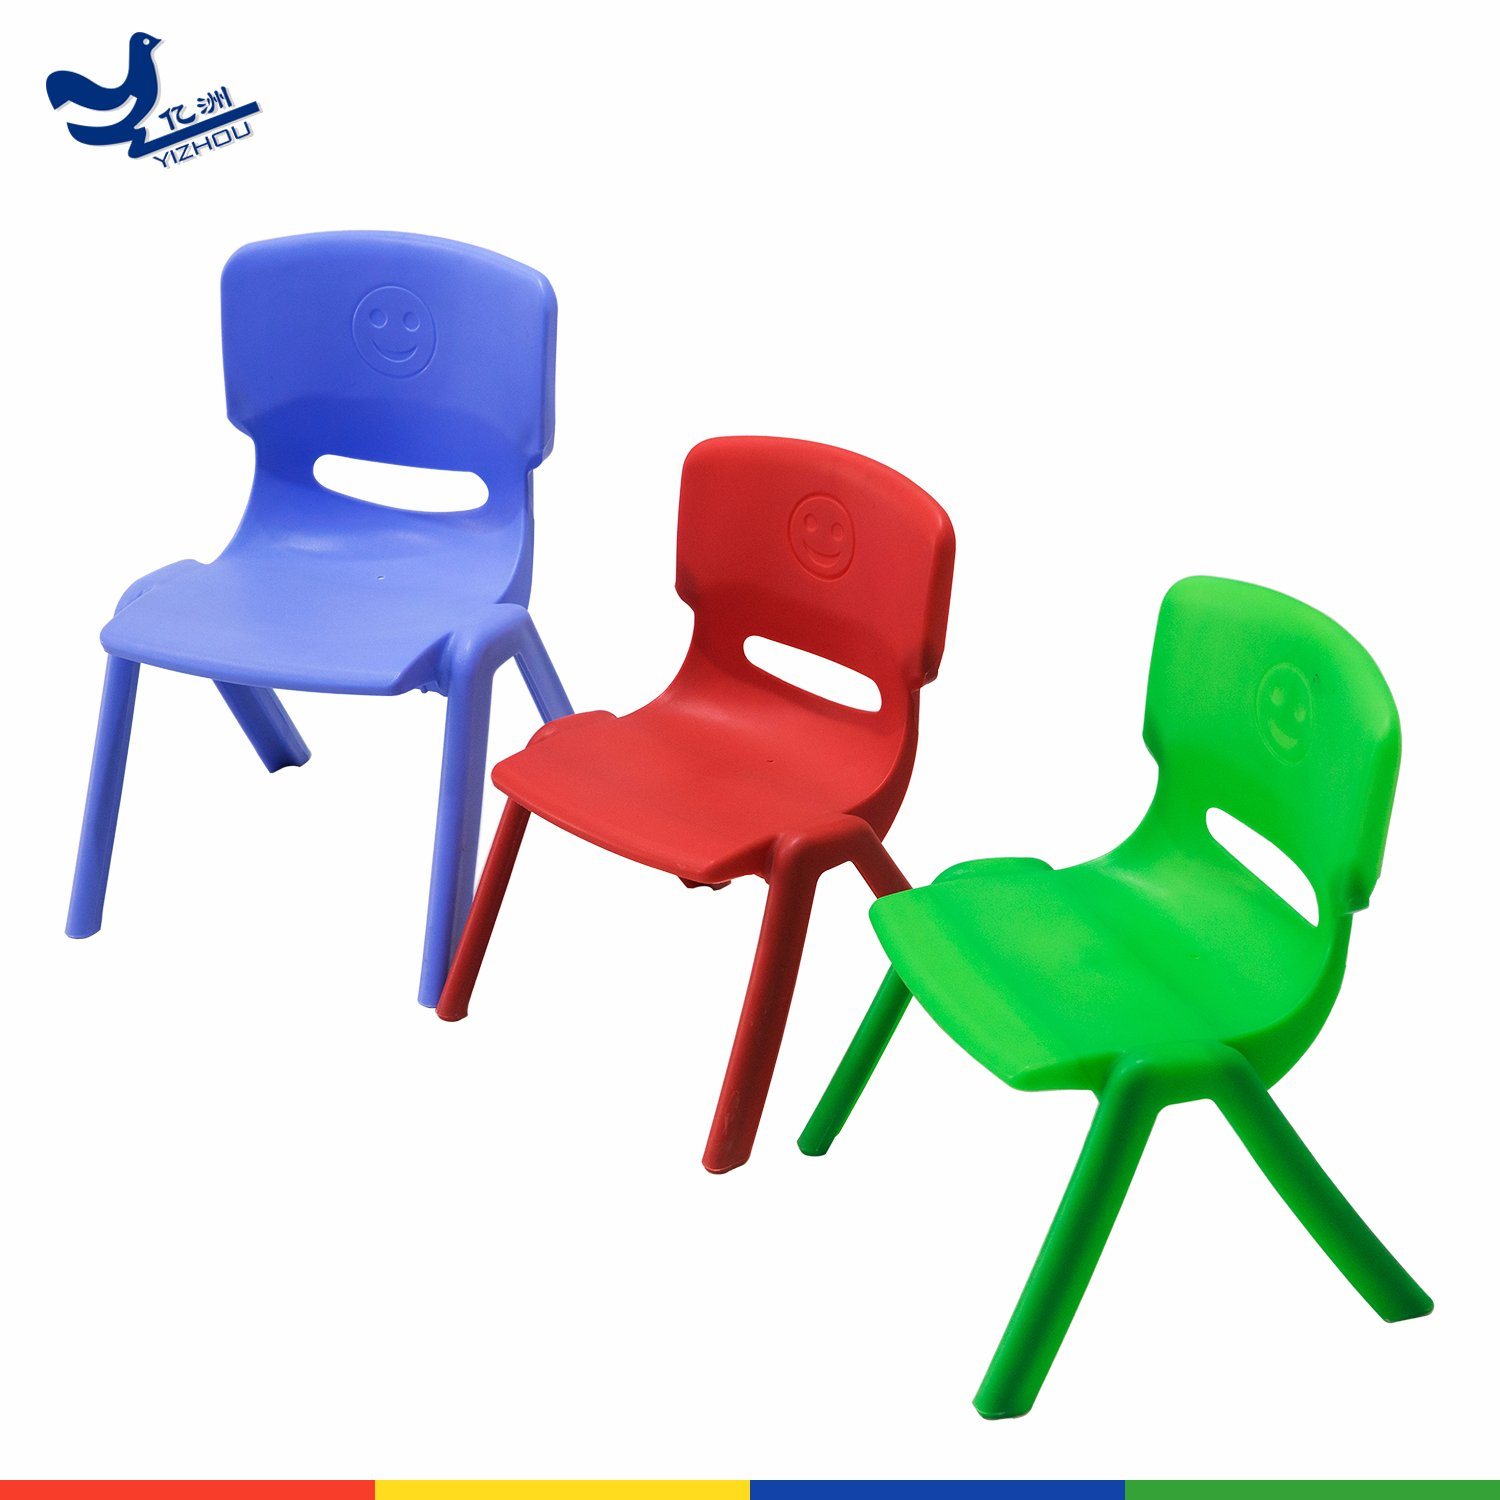 Plastic Childrens Chairs Made of Virgin HDPE for Indoor and Outdoor Use